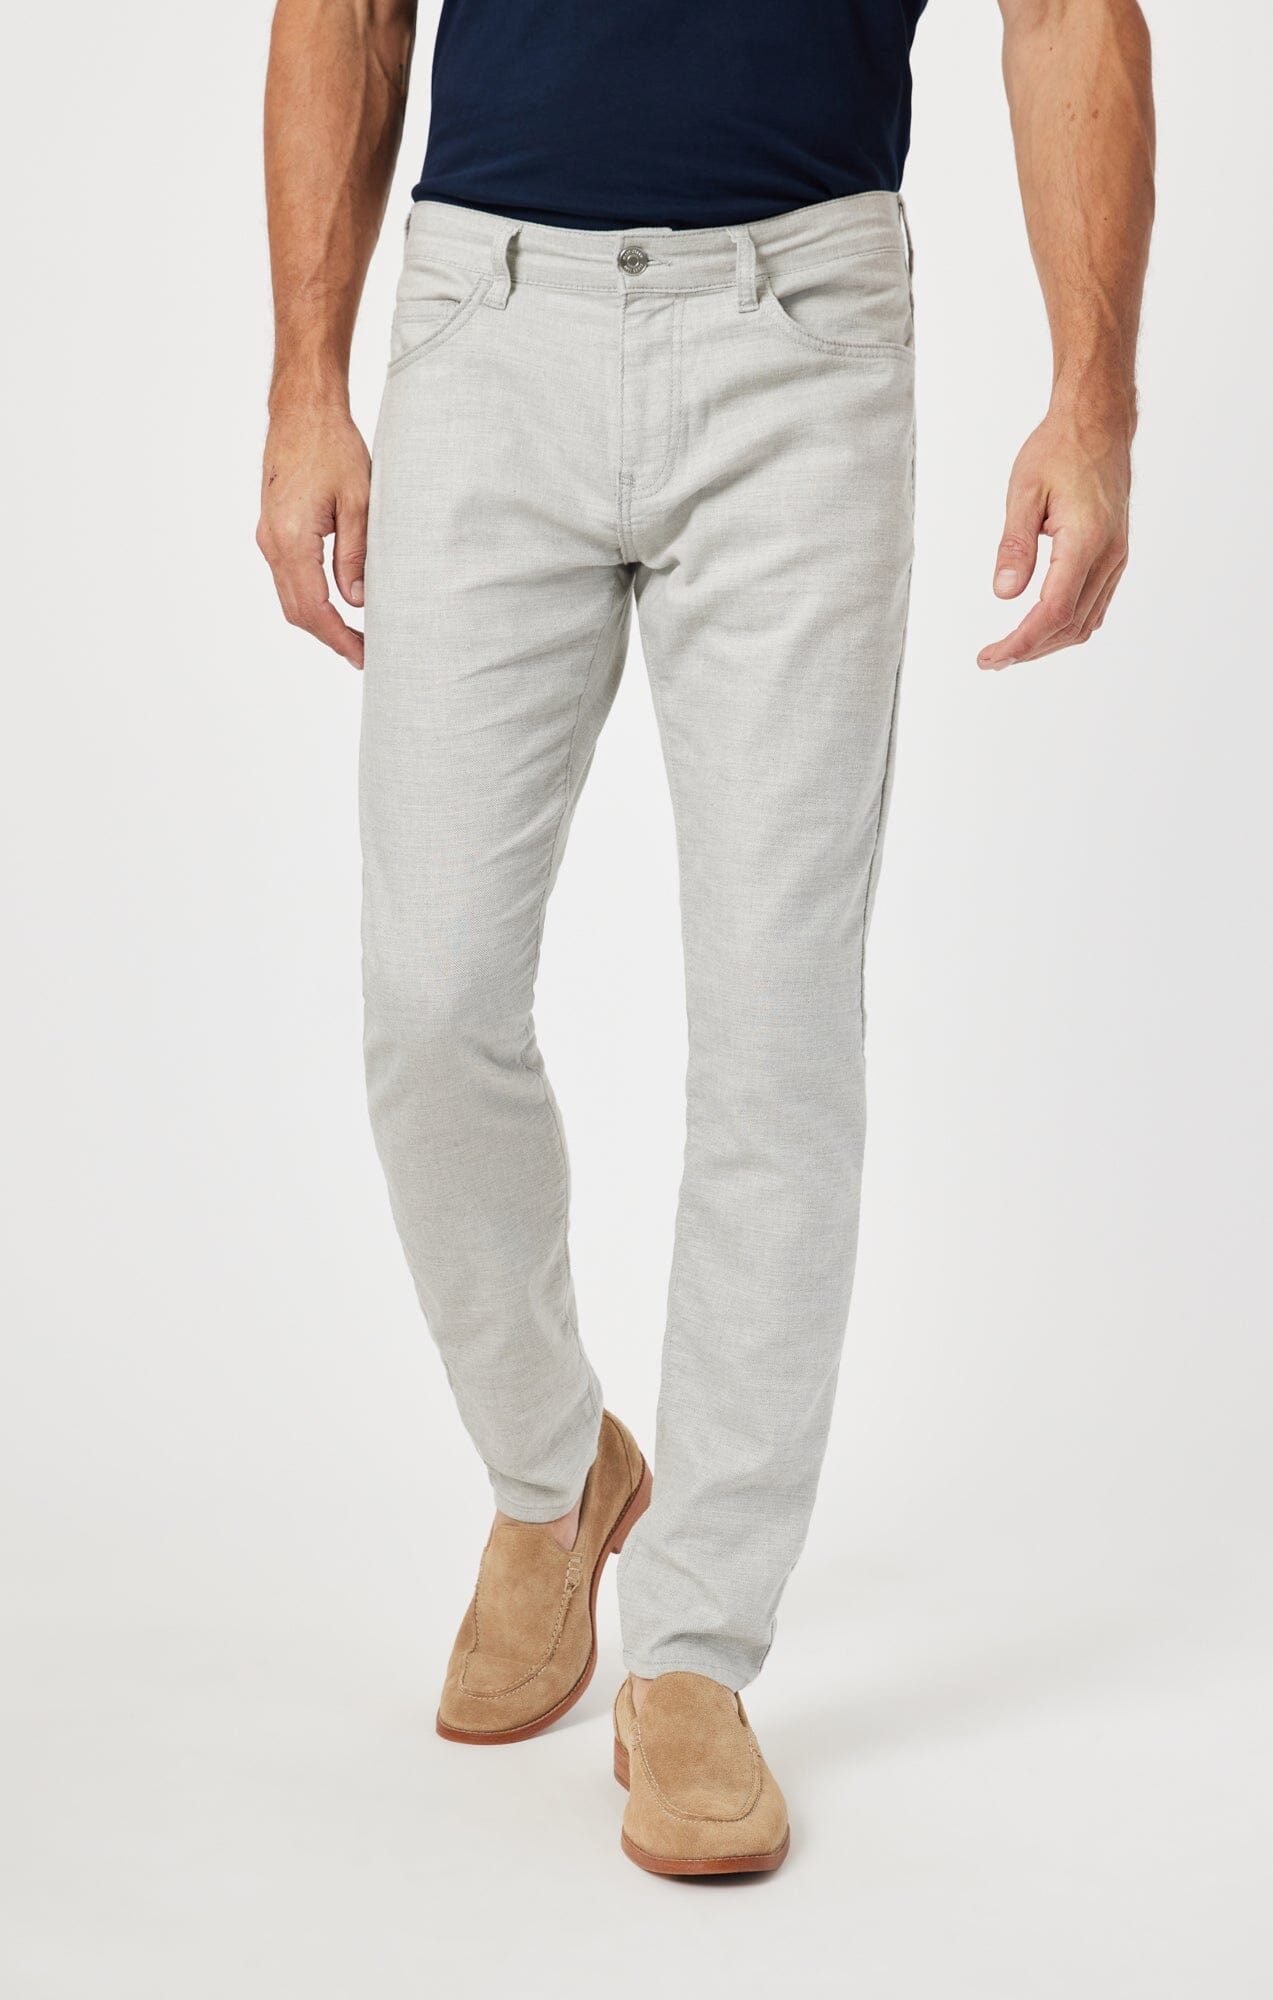 Signature The Perfect Pants // Light Grey (35WX34L) - The first